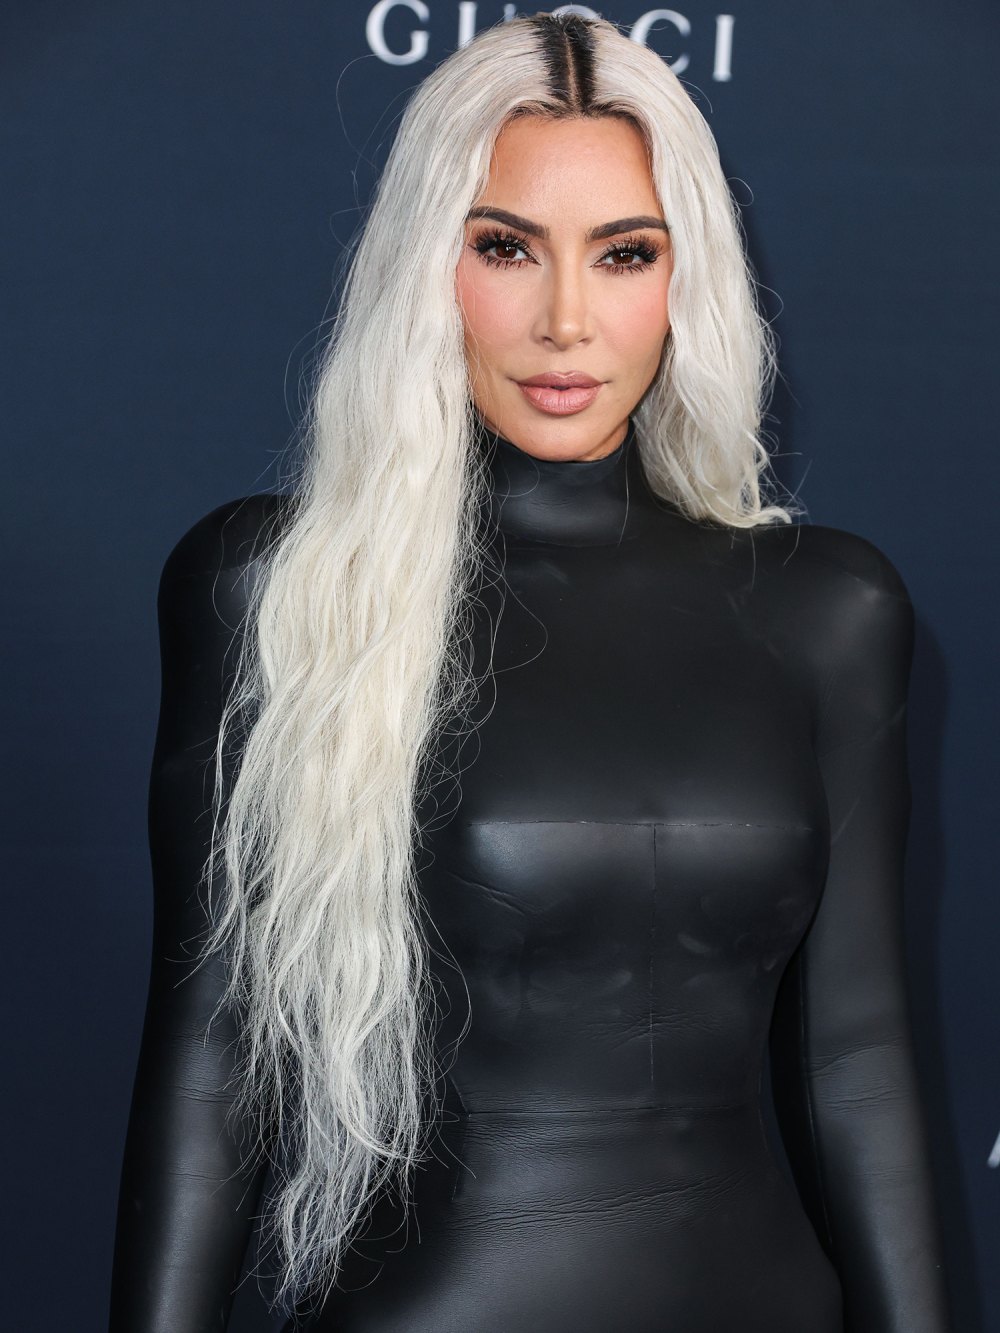 Kim Kardashian Shares Unedited Christmas Snap With Sisters Amid Photoshop Allegations - 583 11th Annual LACMA Art + Film Gala 2022, Los Angeles County Museum of Art, Los Angeles, California, United States - 05 Nov 2022